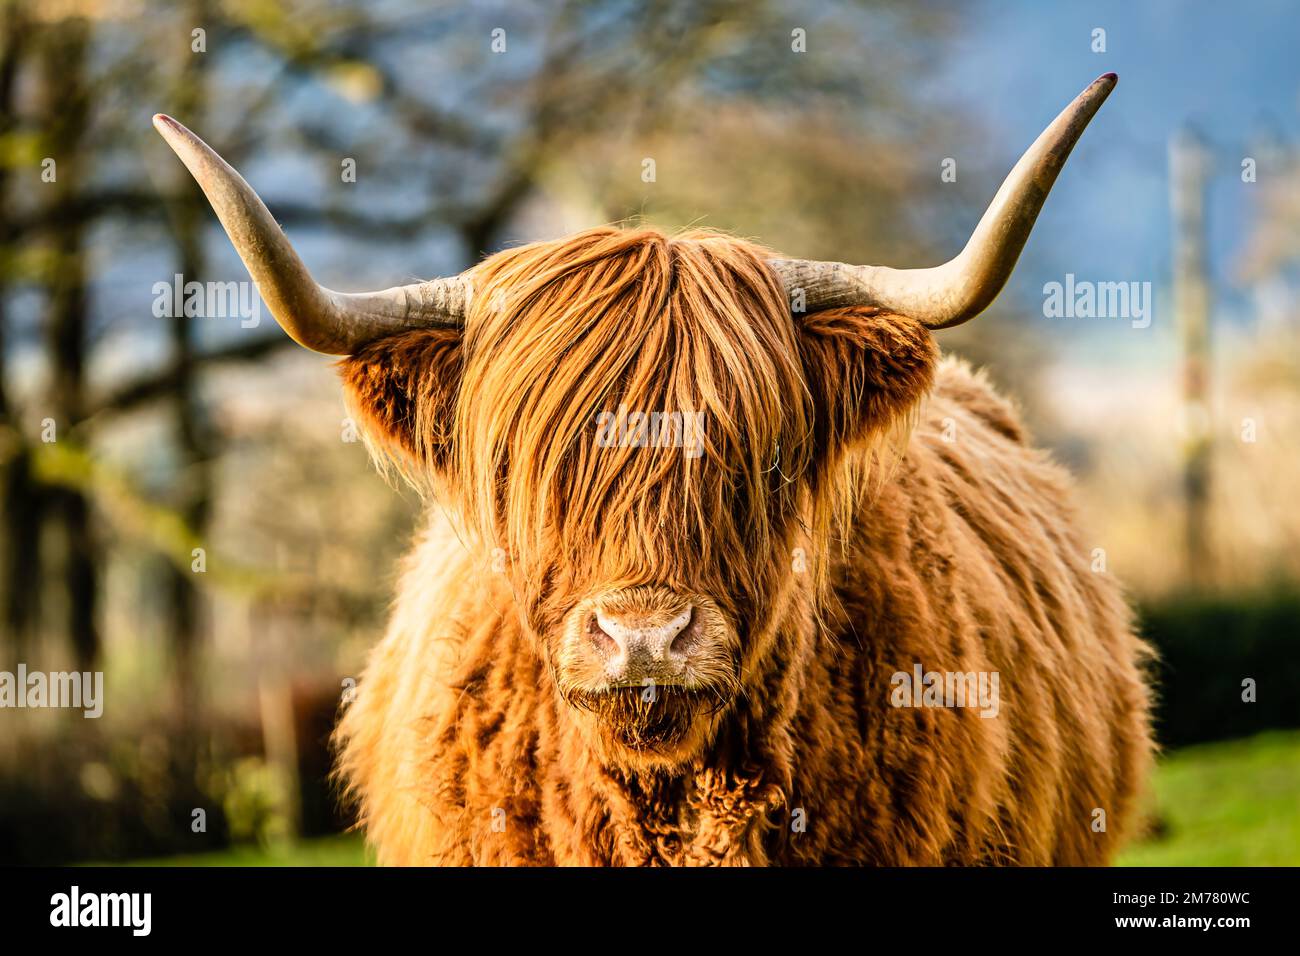 Highland cow with big horns and shaggy body looking into the camera lens Stock Photo